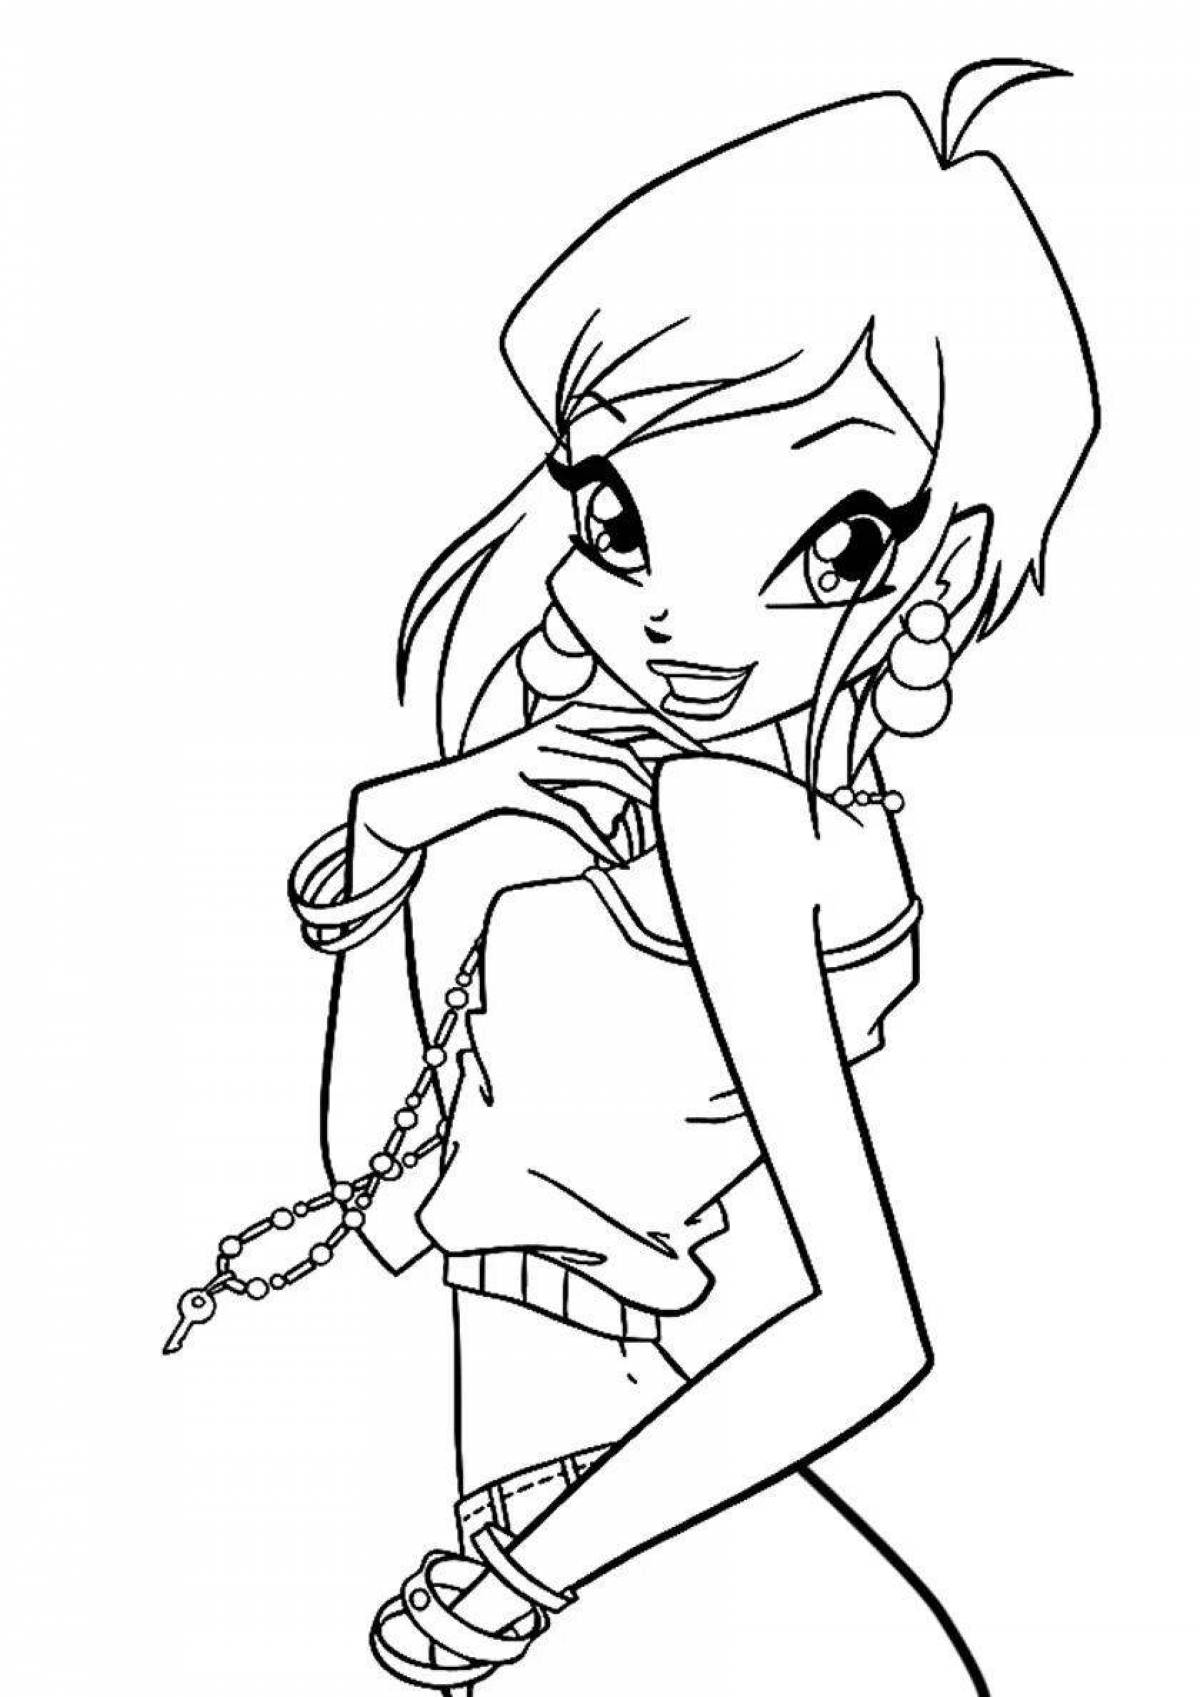 Awesome winx season 4 coloring book